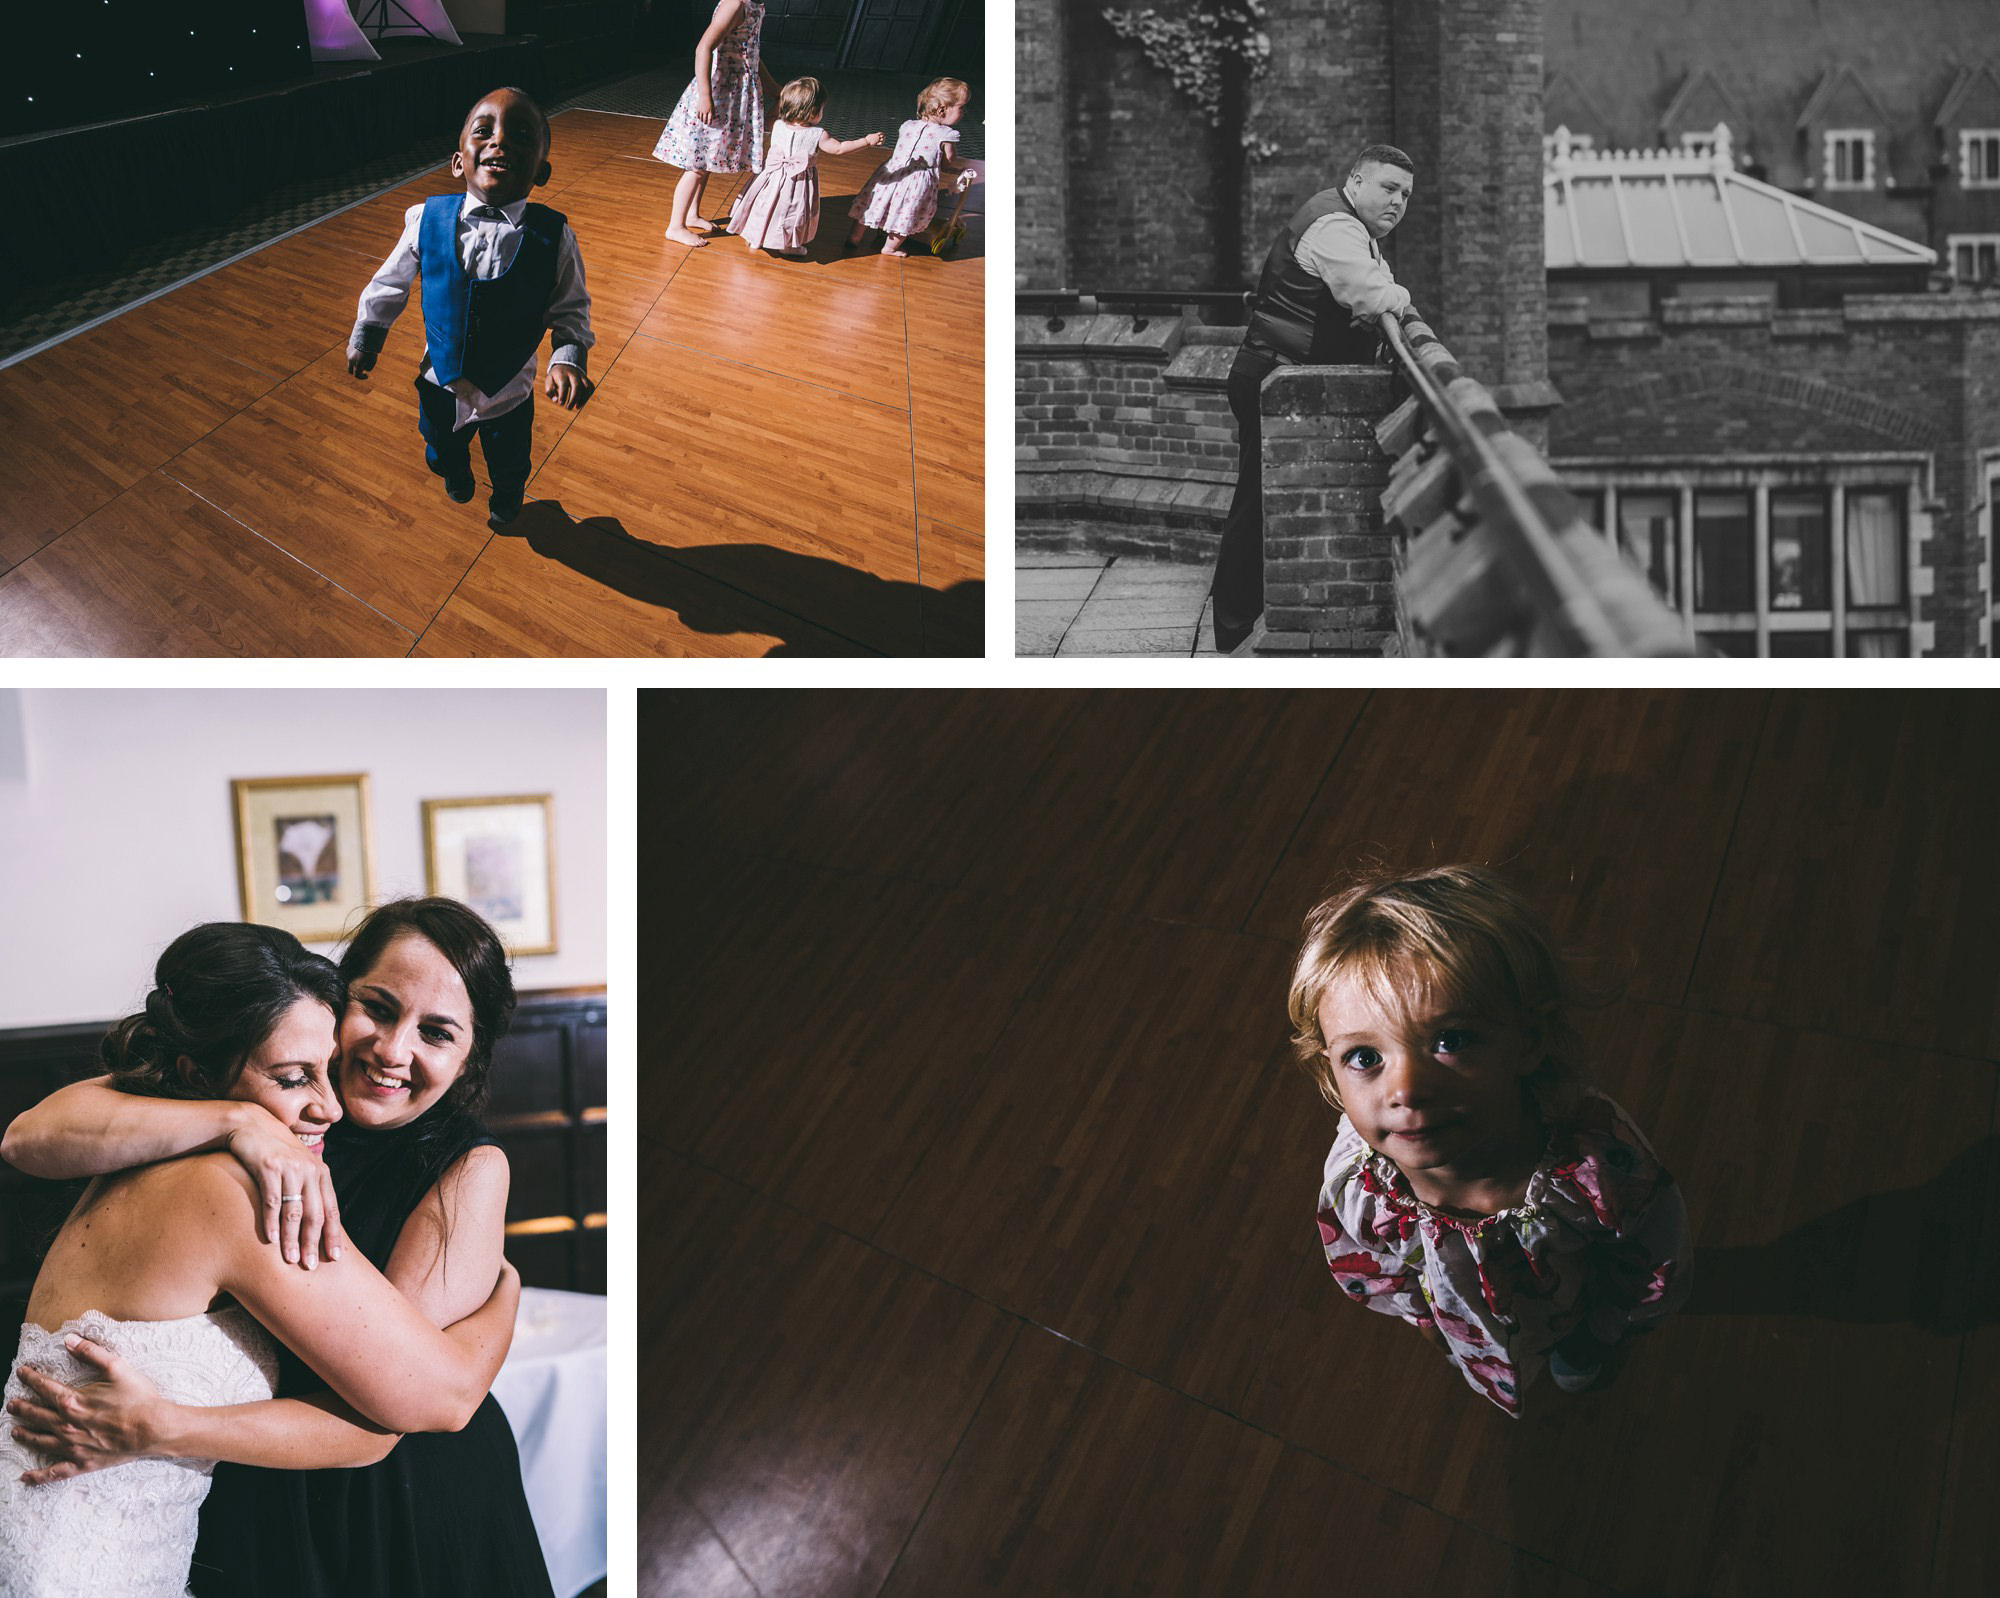 dunston-hall-wedding-in-norwich-james-powell-photography-022